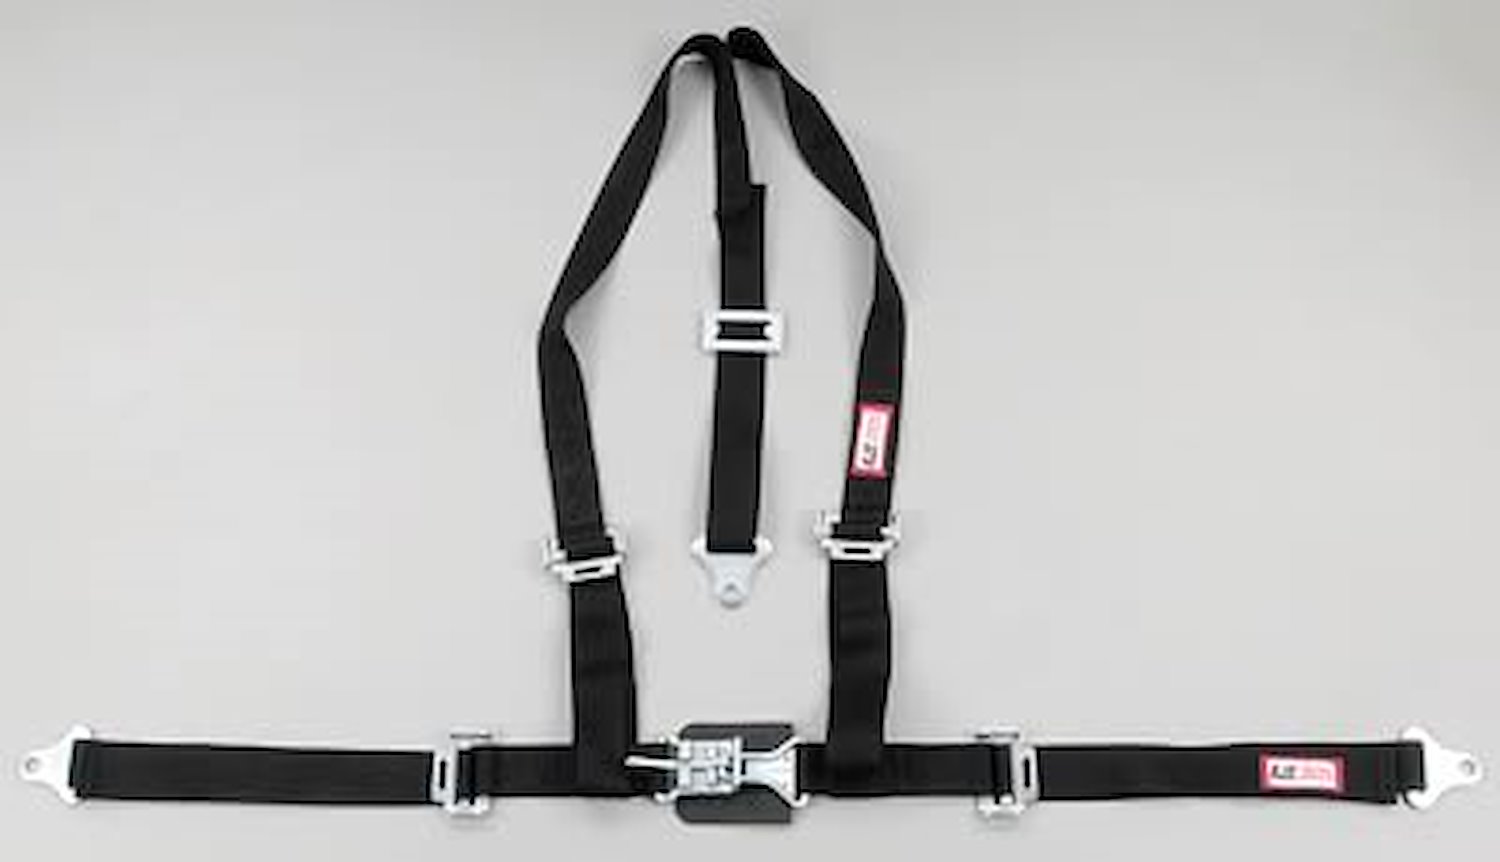 NON-SFI L&L HARNESS 3 PULL DOWN Lap BELT SNAP SEWN IN 2 S.H. Y FLOOR Mount w/STERNUM STRAP WRAP/SNAP BLUE